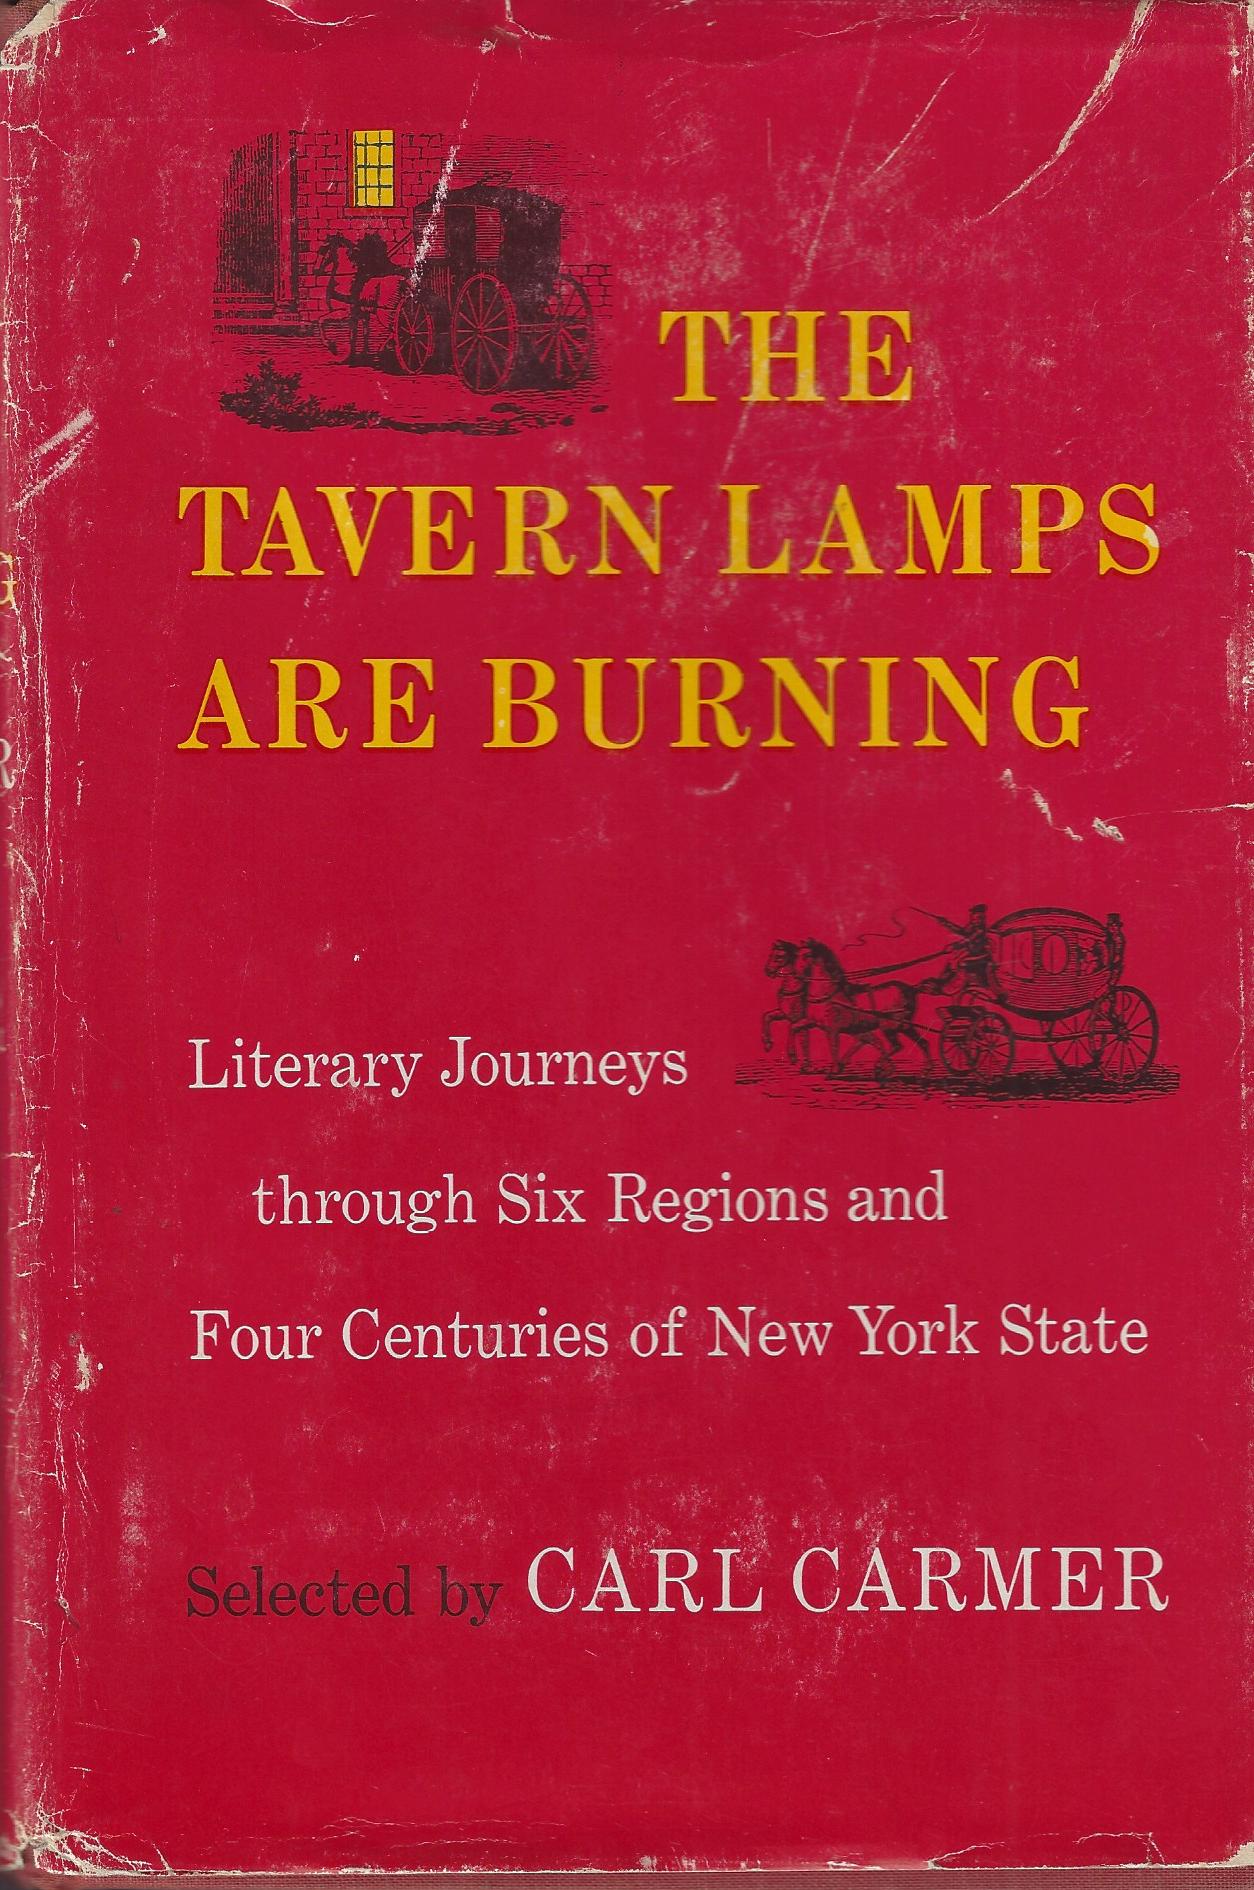 The Tavern Lamps are burning: Literary Journeys Through Six Regions and Four Centuries of NY State - Carmer, Carl